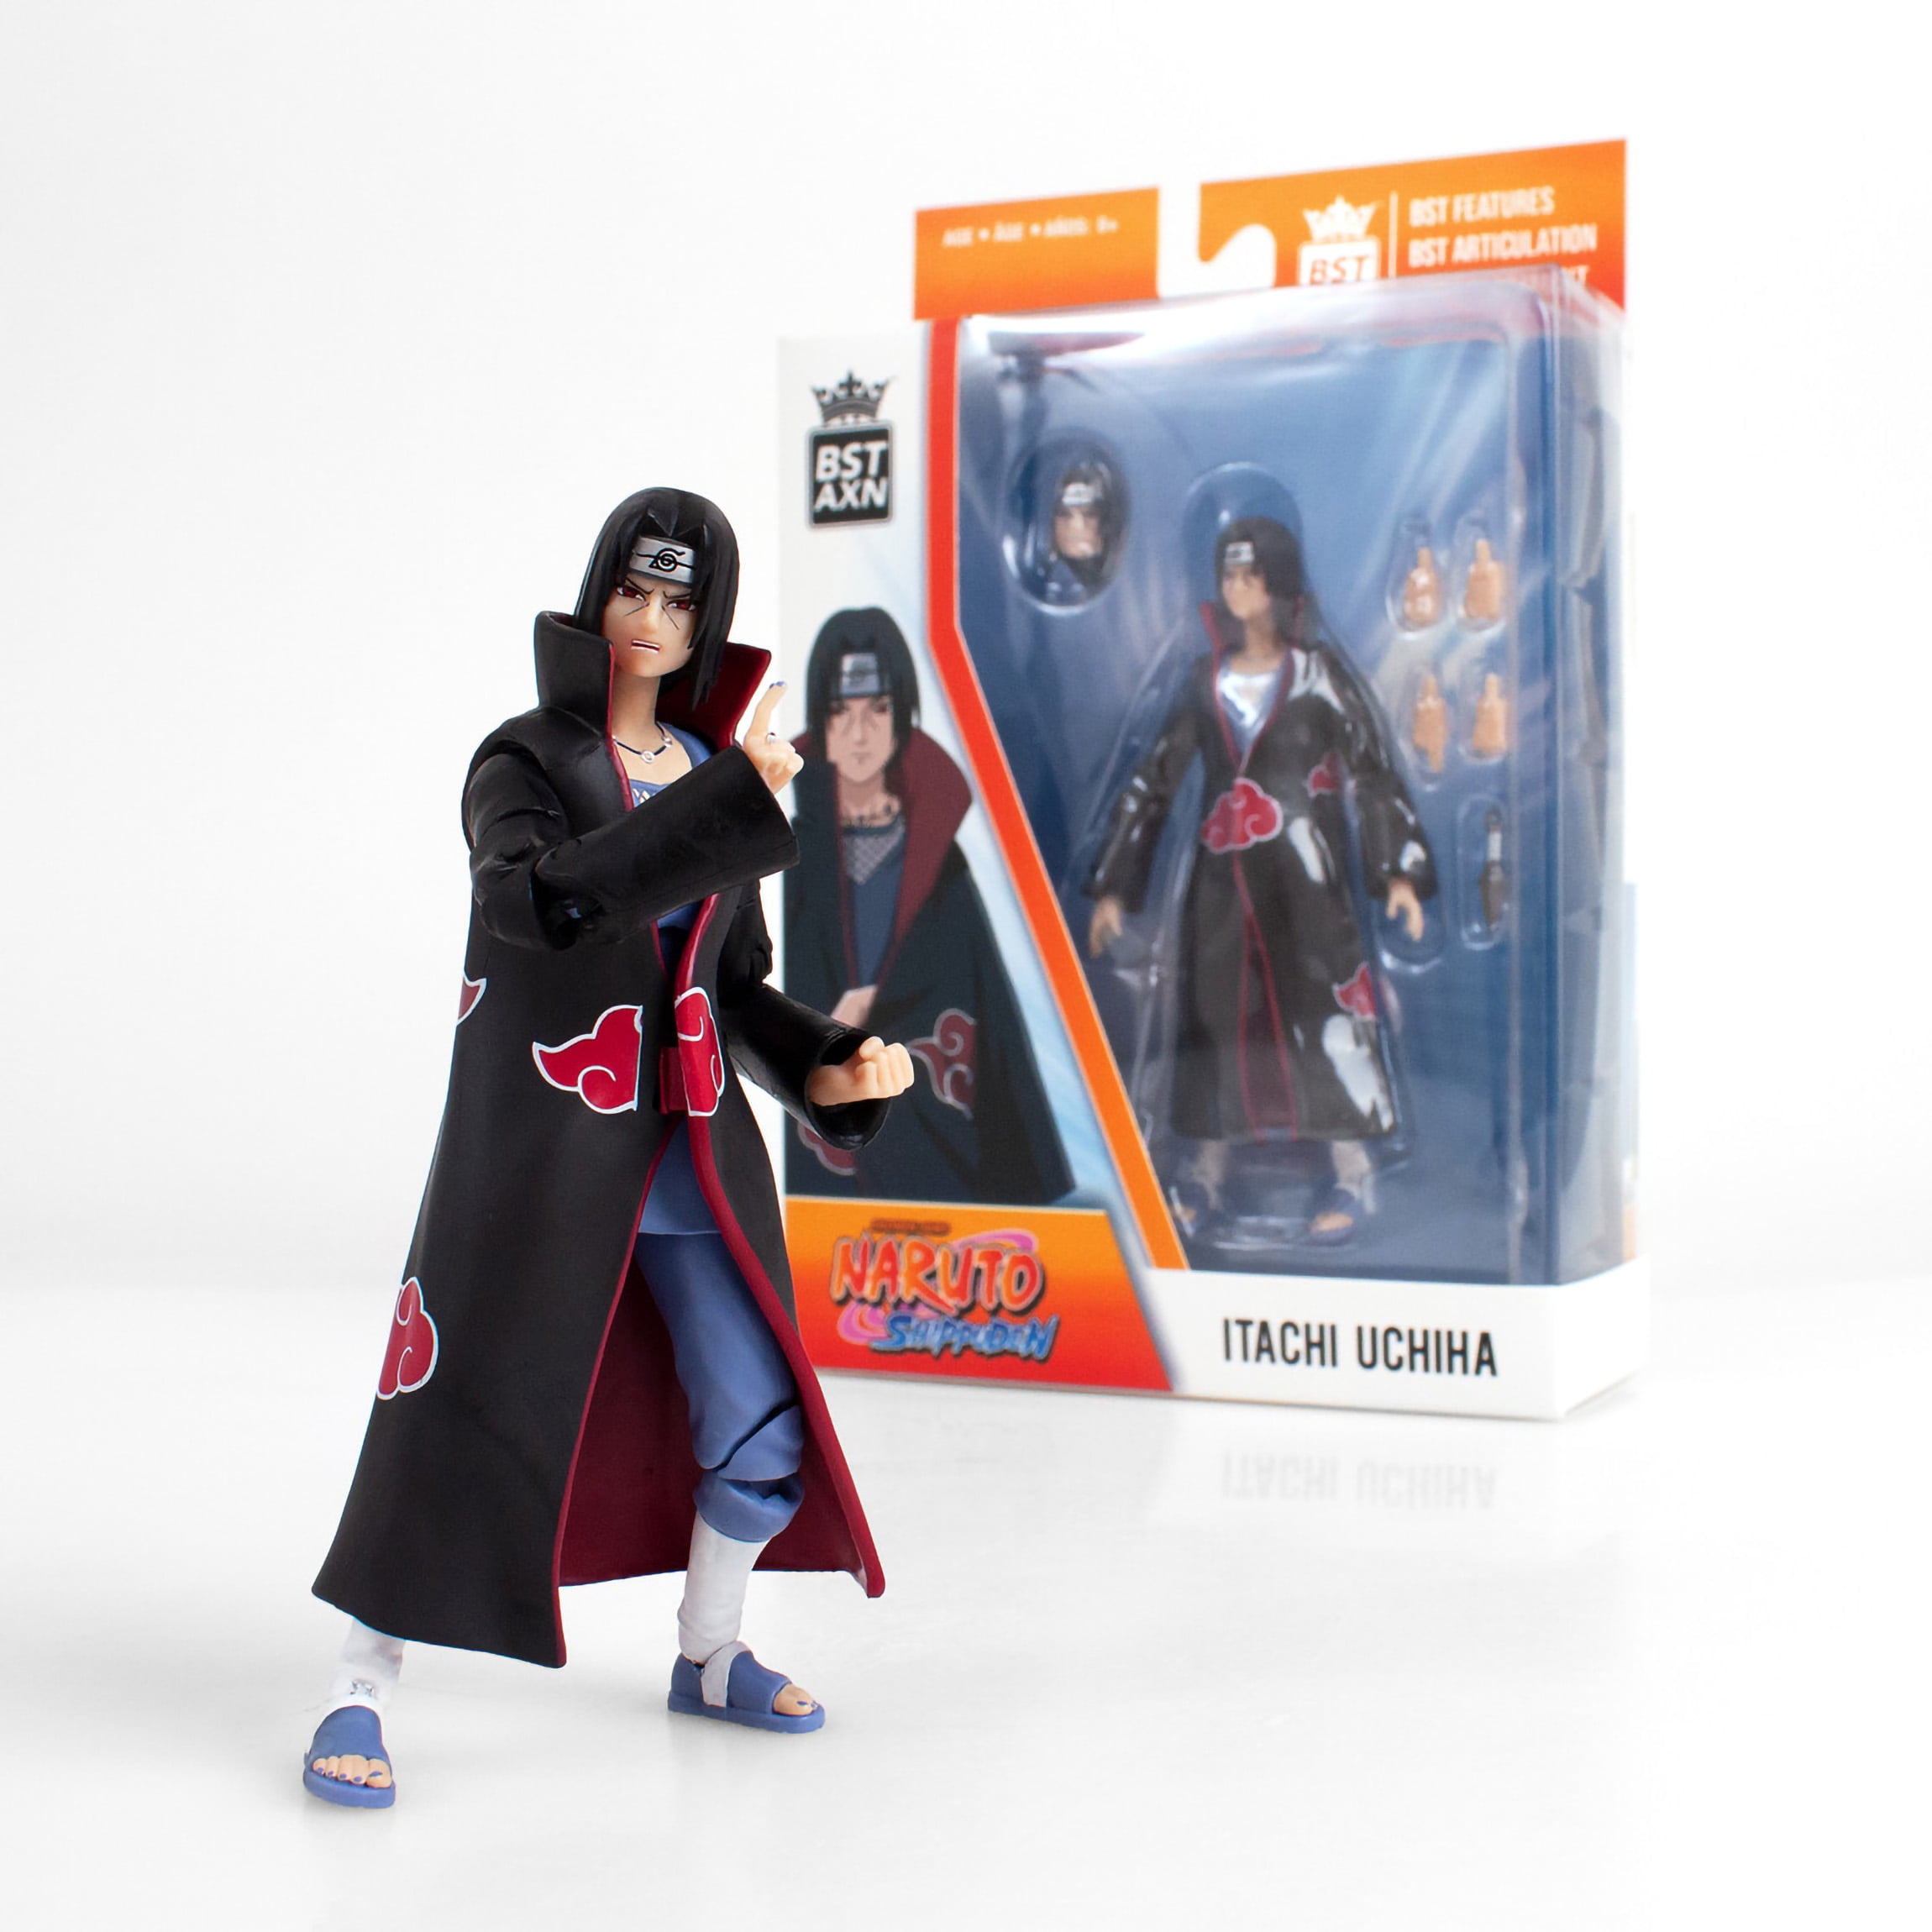 ACC NUOVO BST BST AXN NARUTO ITACHI UCHIHA 5IN AF NET 